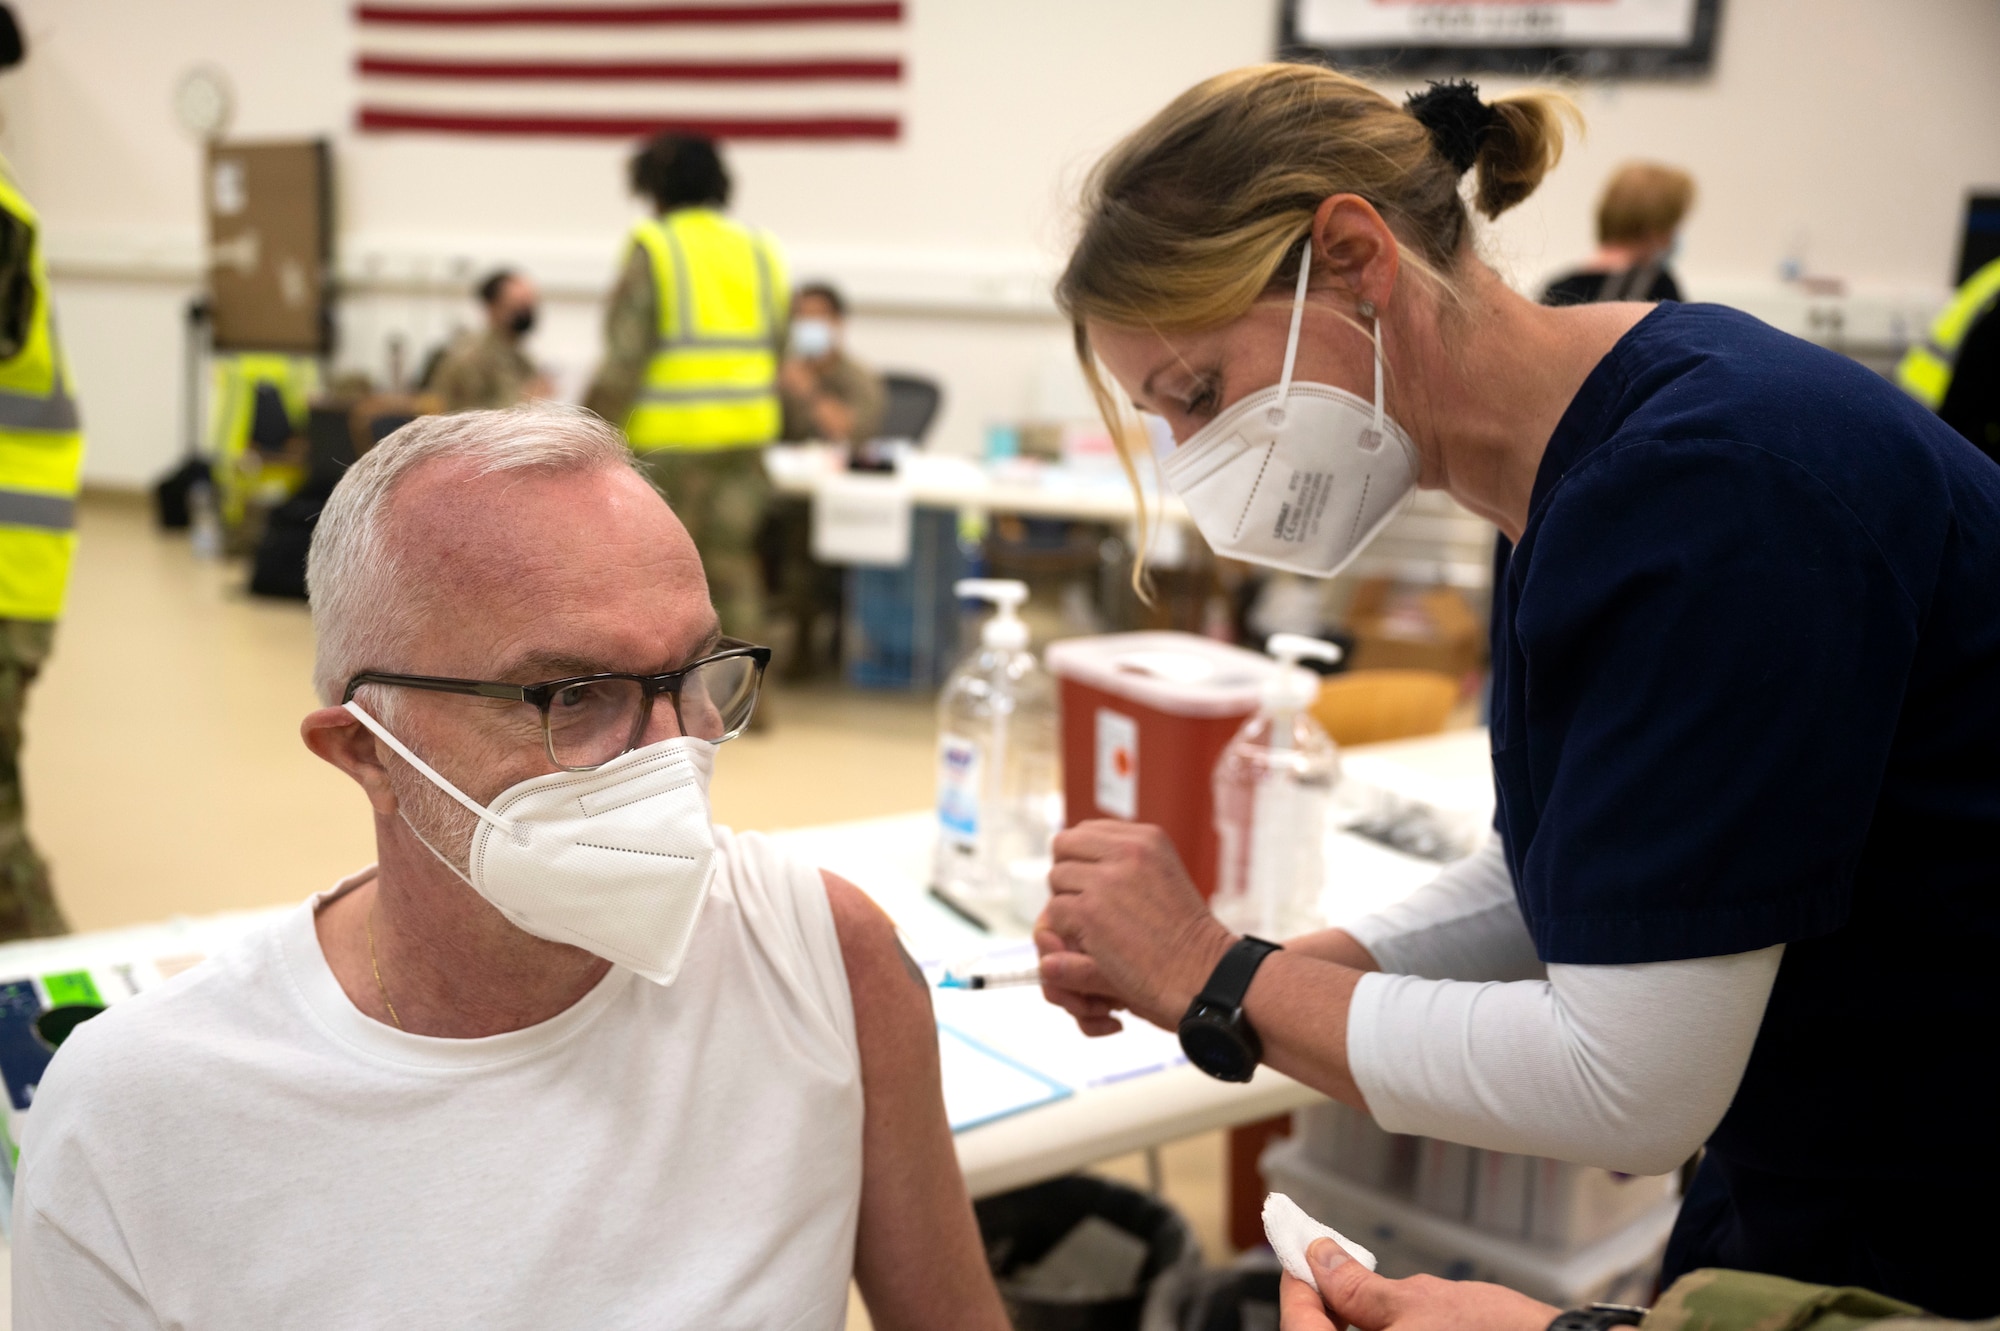 Andreas Heinze, 721st Aerial Port Squadron motor carrier safety specialist, receives a COVID-19 vaccine shot from Iris Geist, a German local national nurse, at Ramstein Air Base, Germany